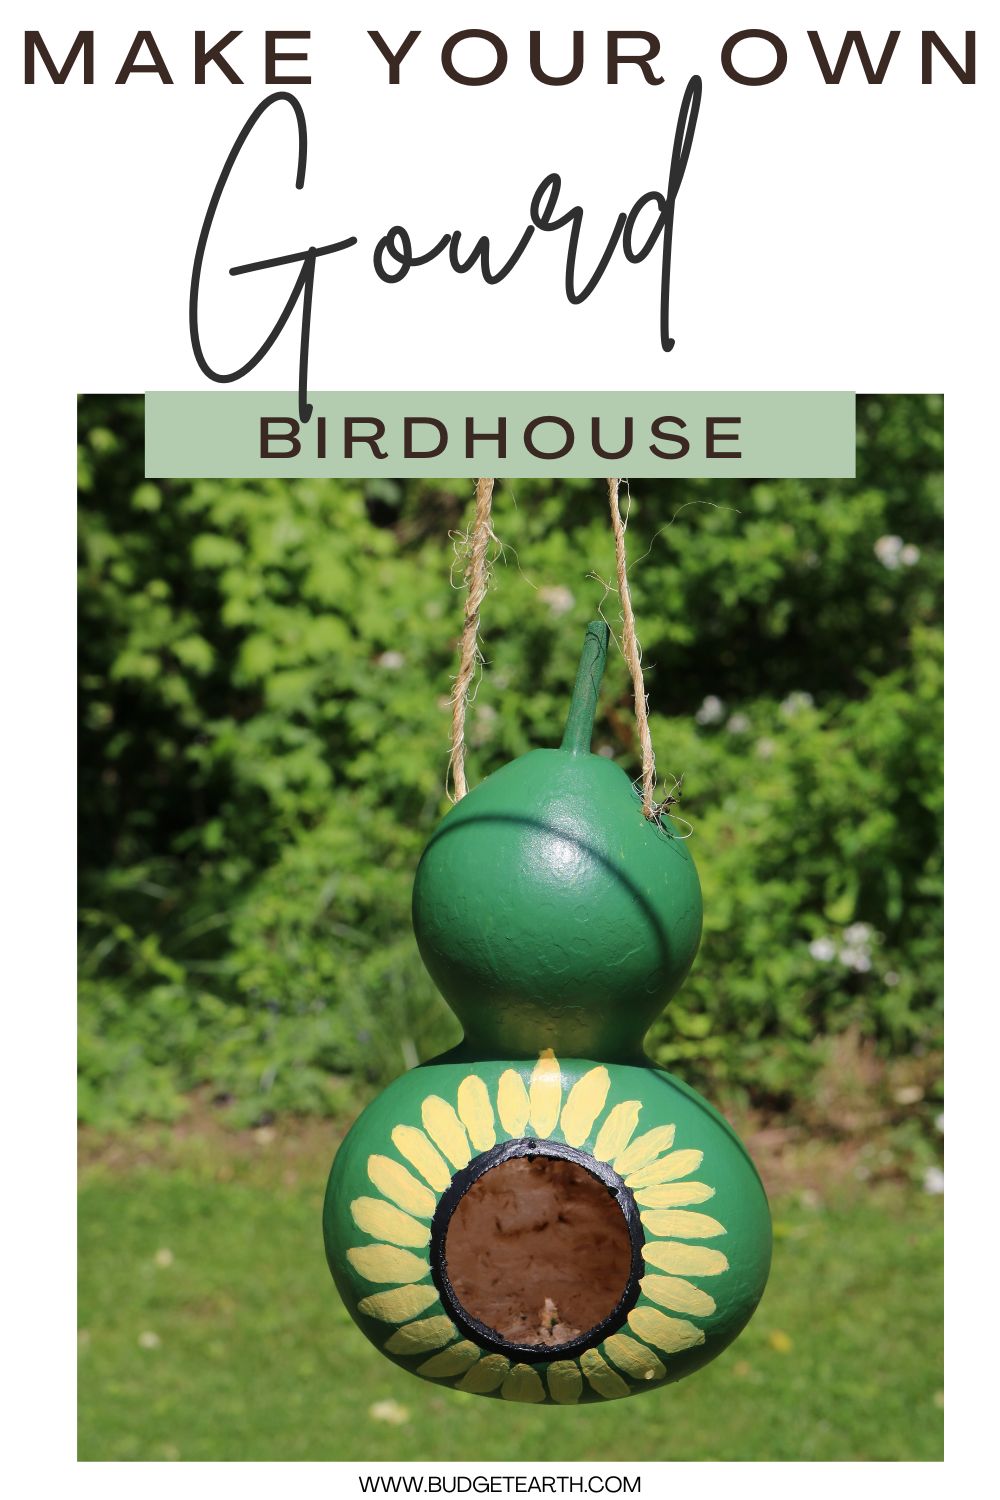 DIY Gourd Birdhouse hanging from a tree